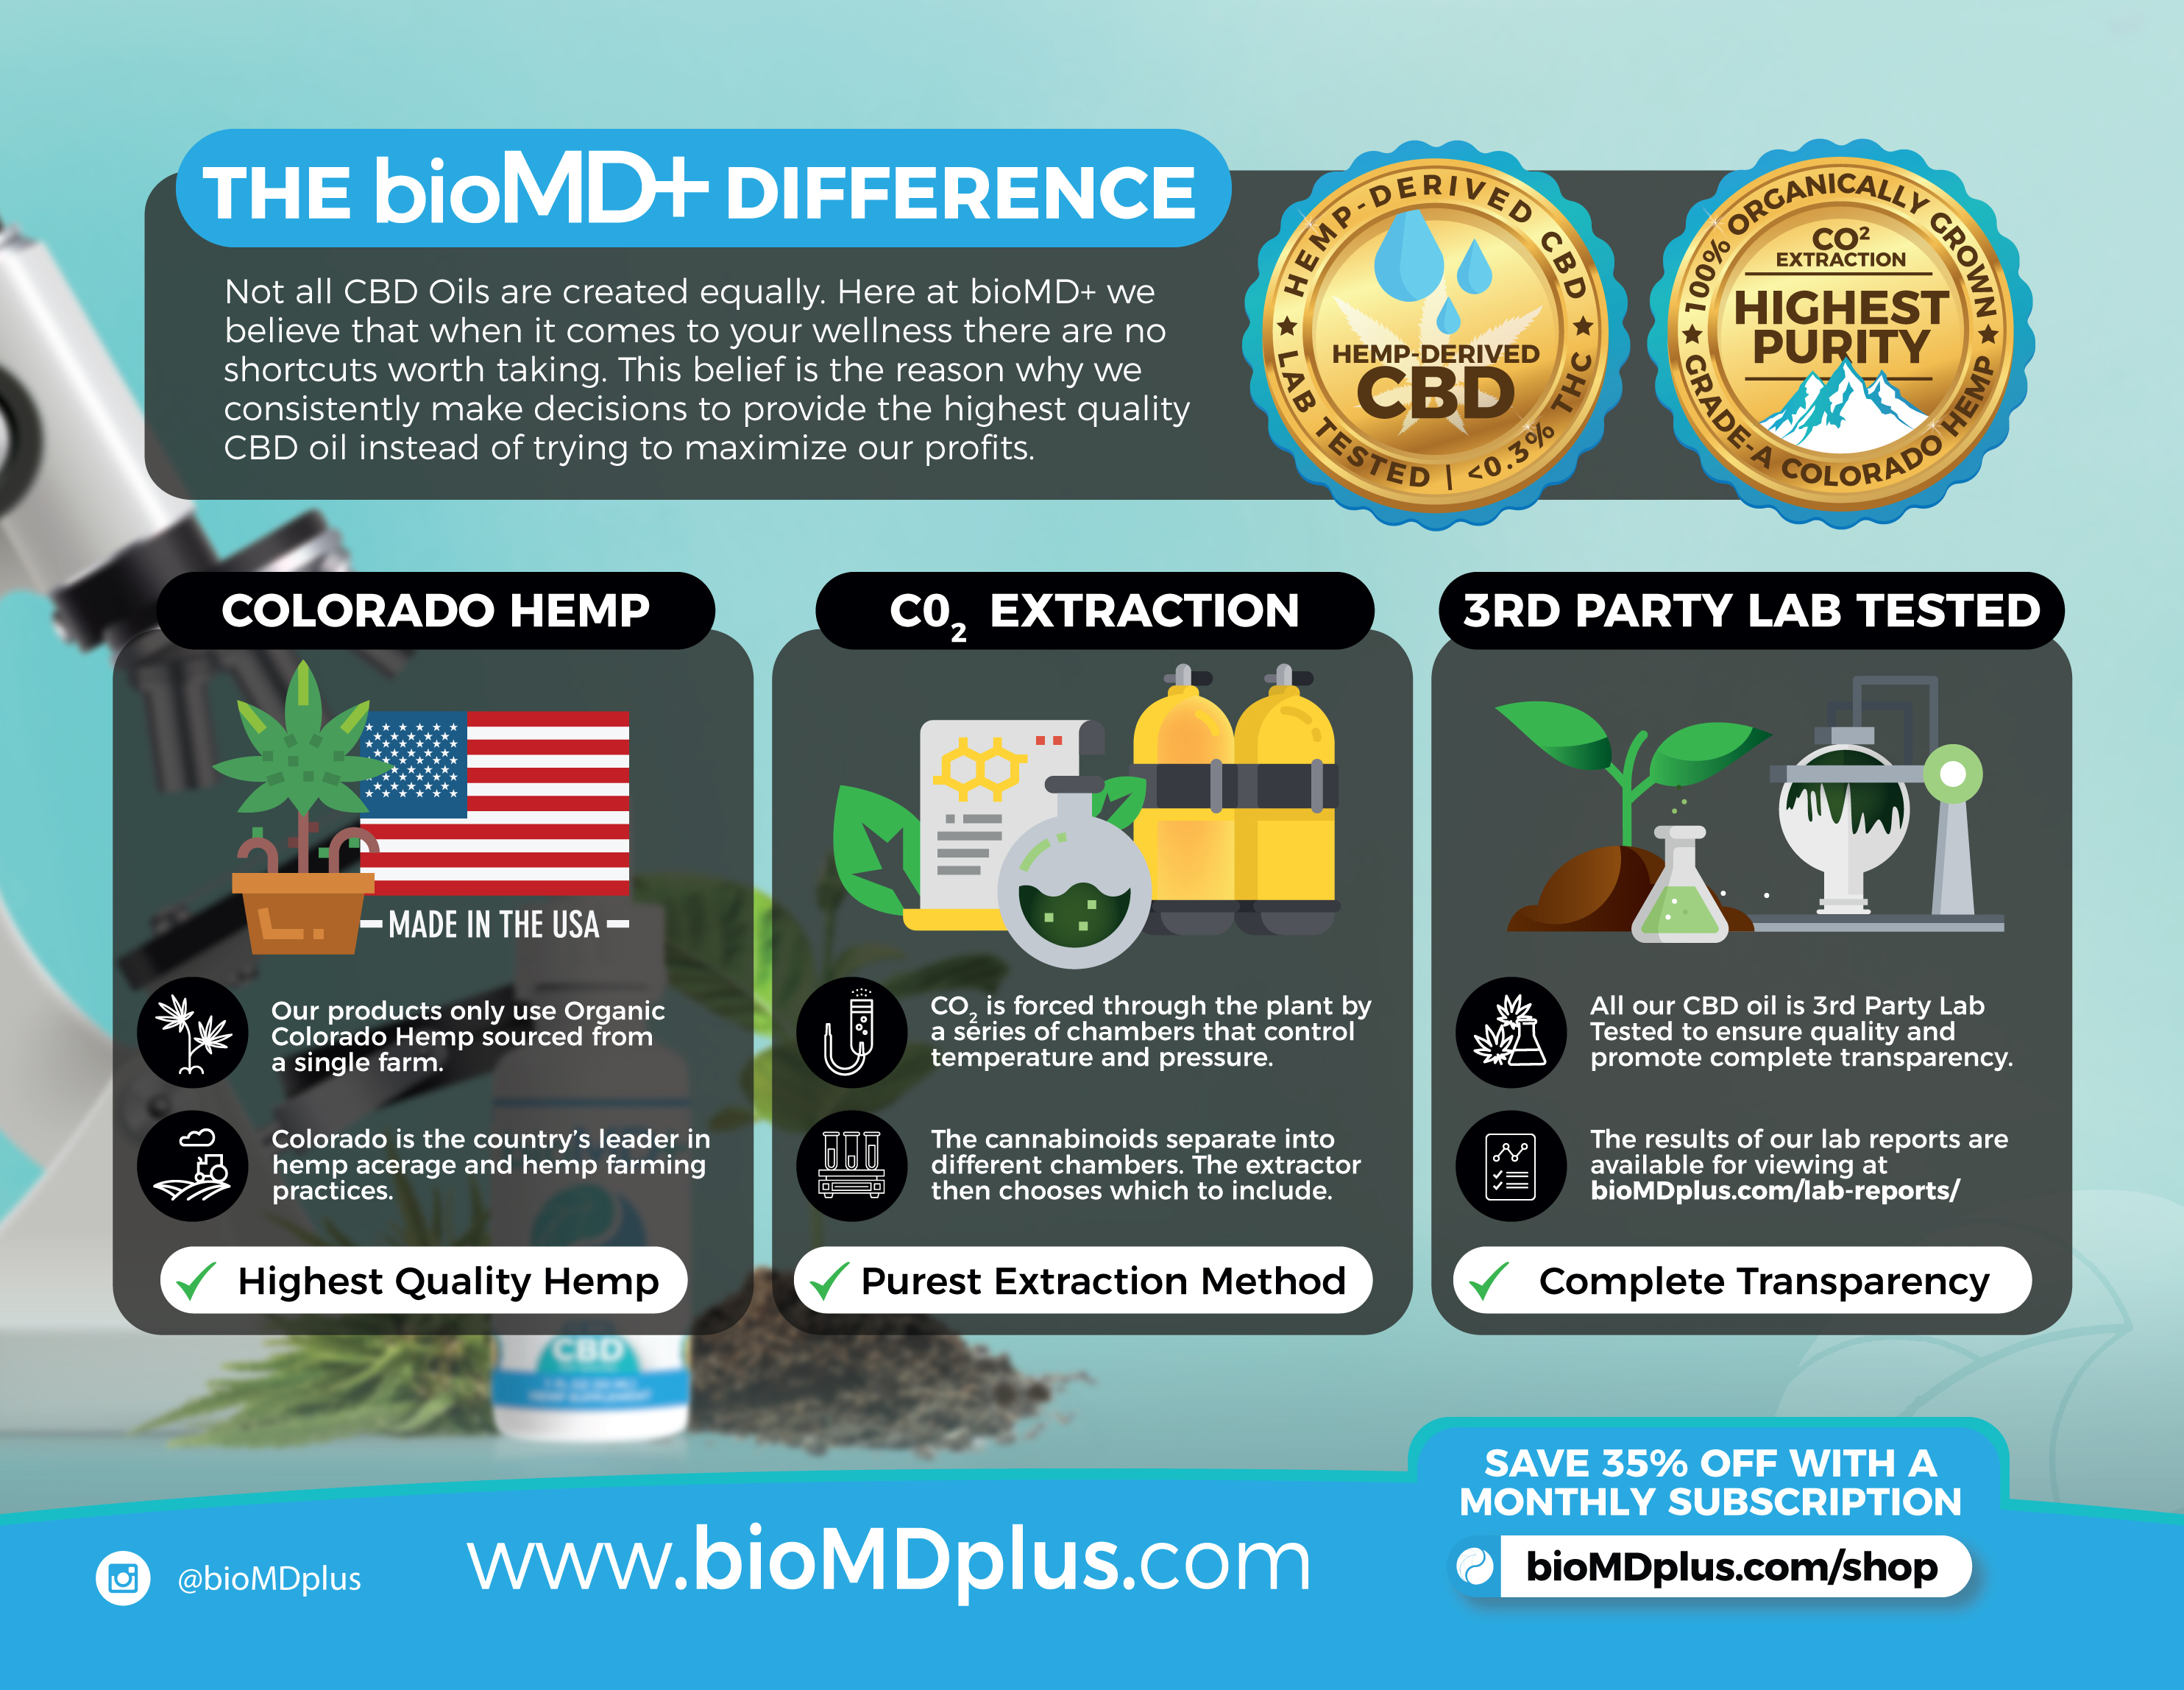 bioMDplus, Wednesday, February 19, 2020, Press release picture